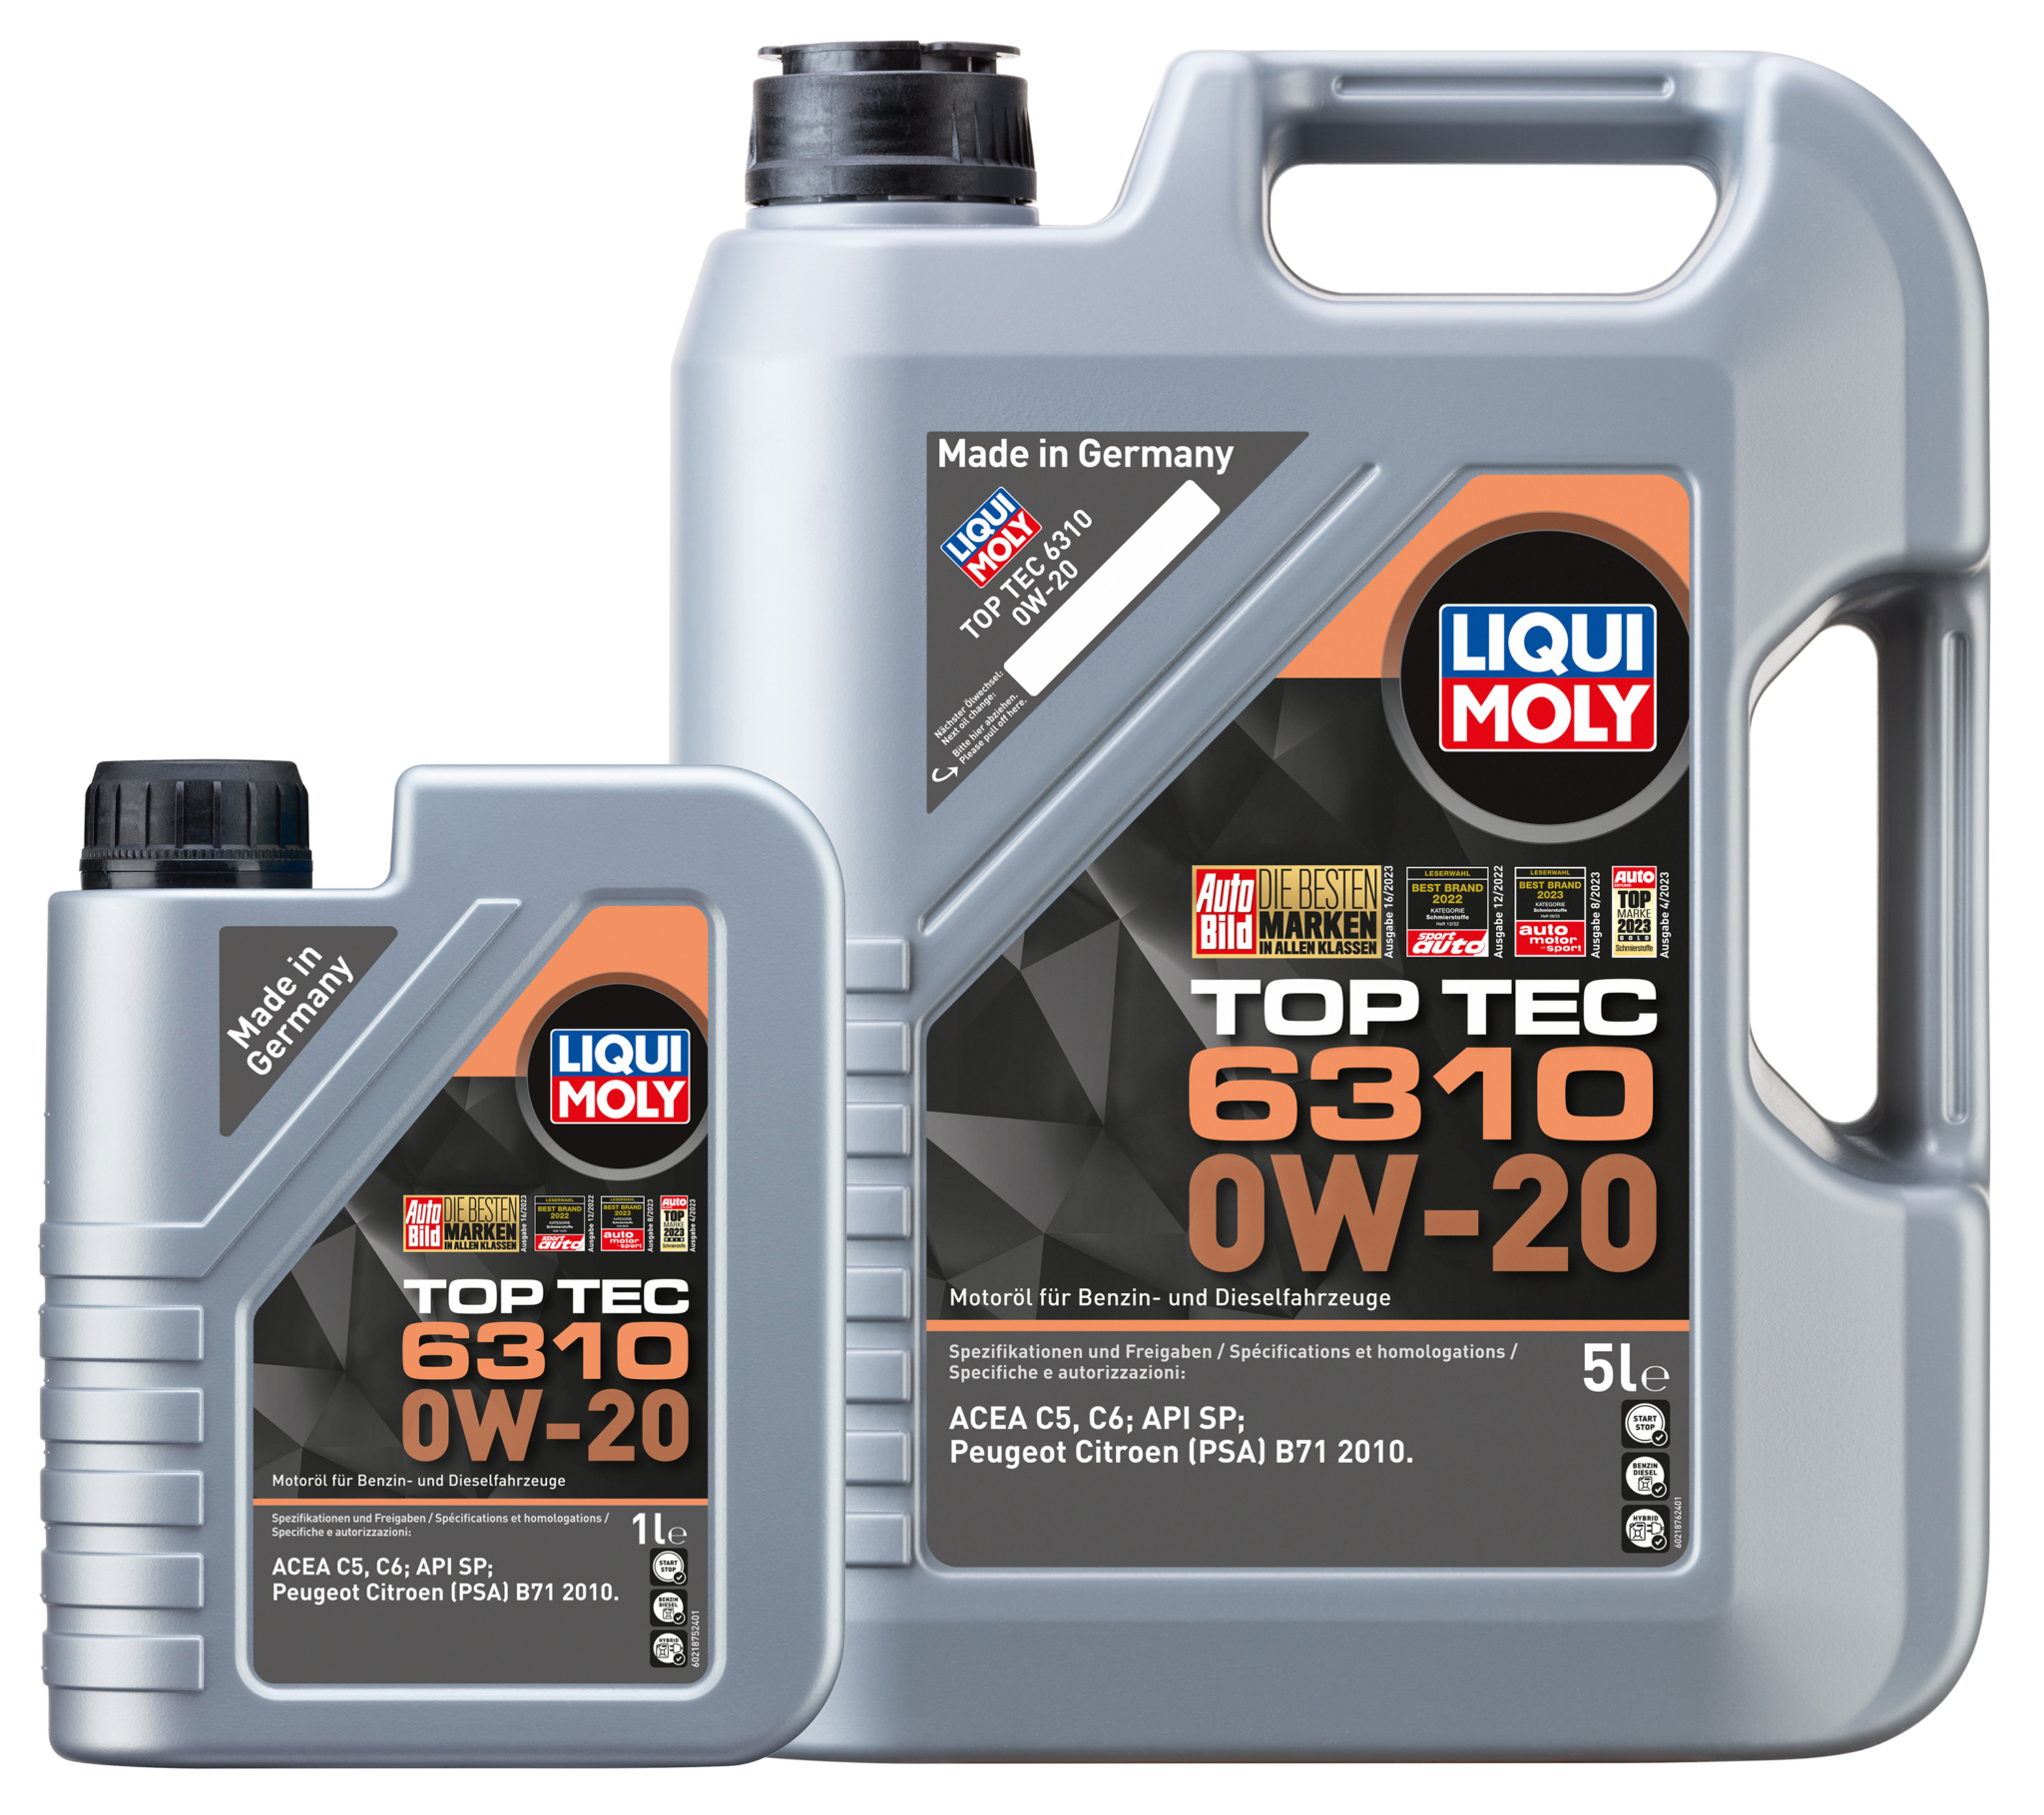 Stellantis Group introduces new Liqui Moly oil developed for PSA Group vehicles